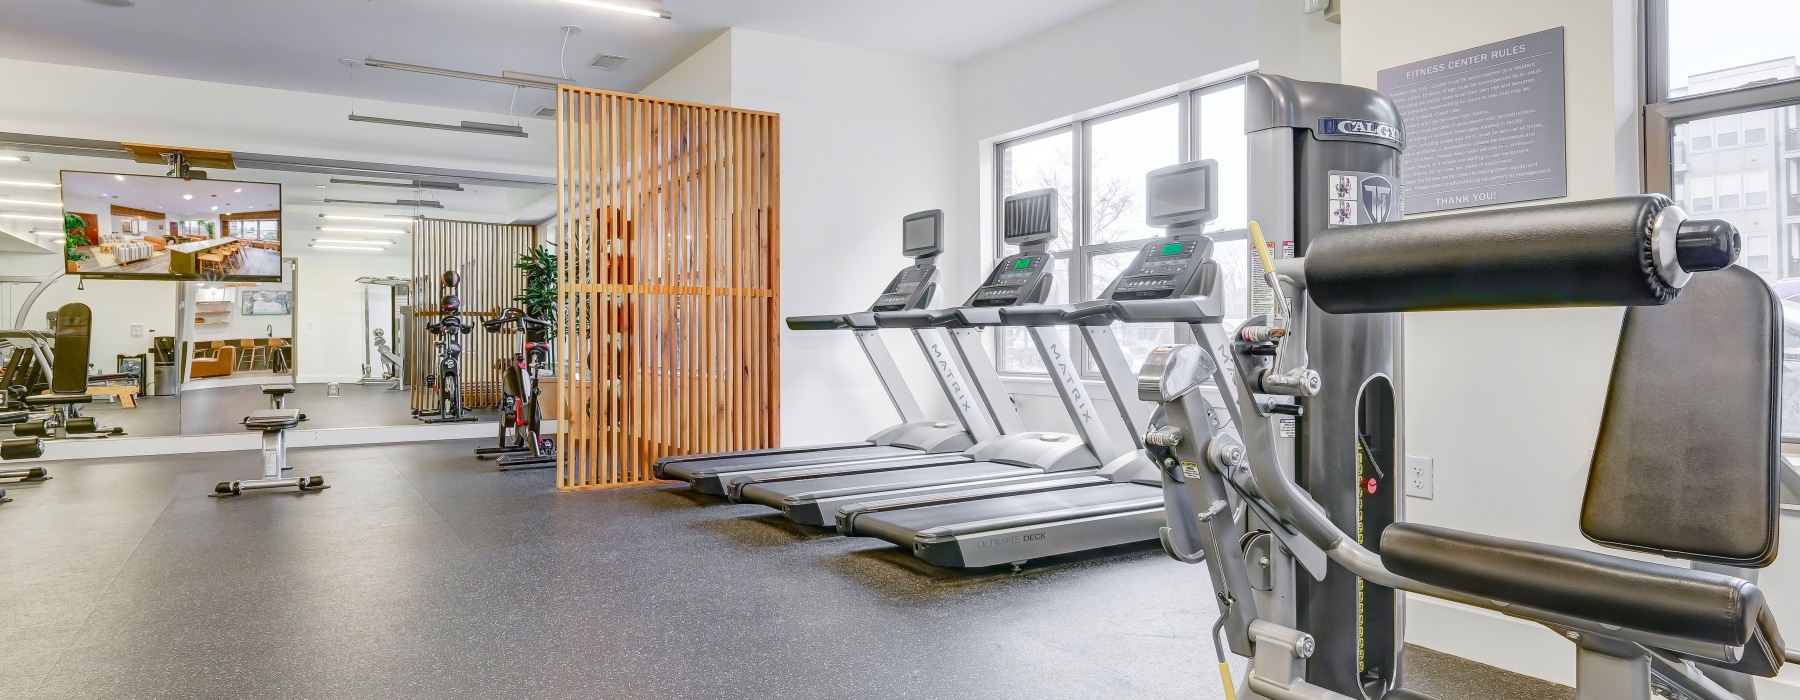 Fitness Room with white walls and various equipment